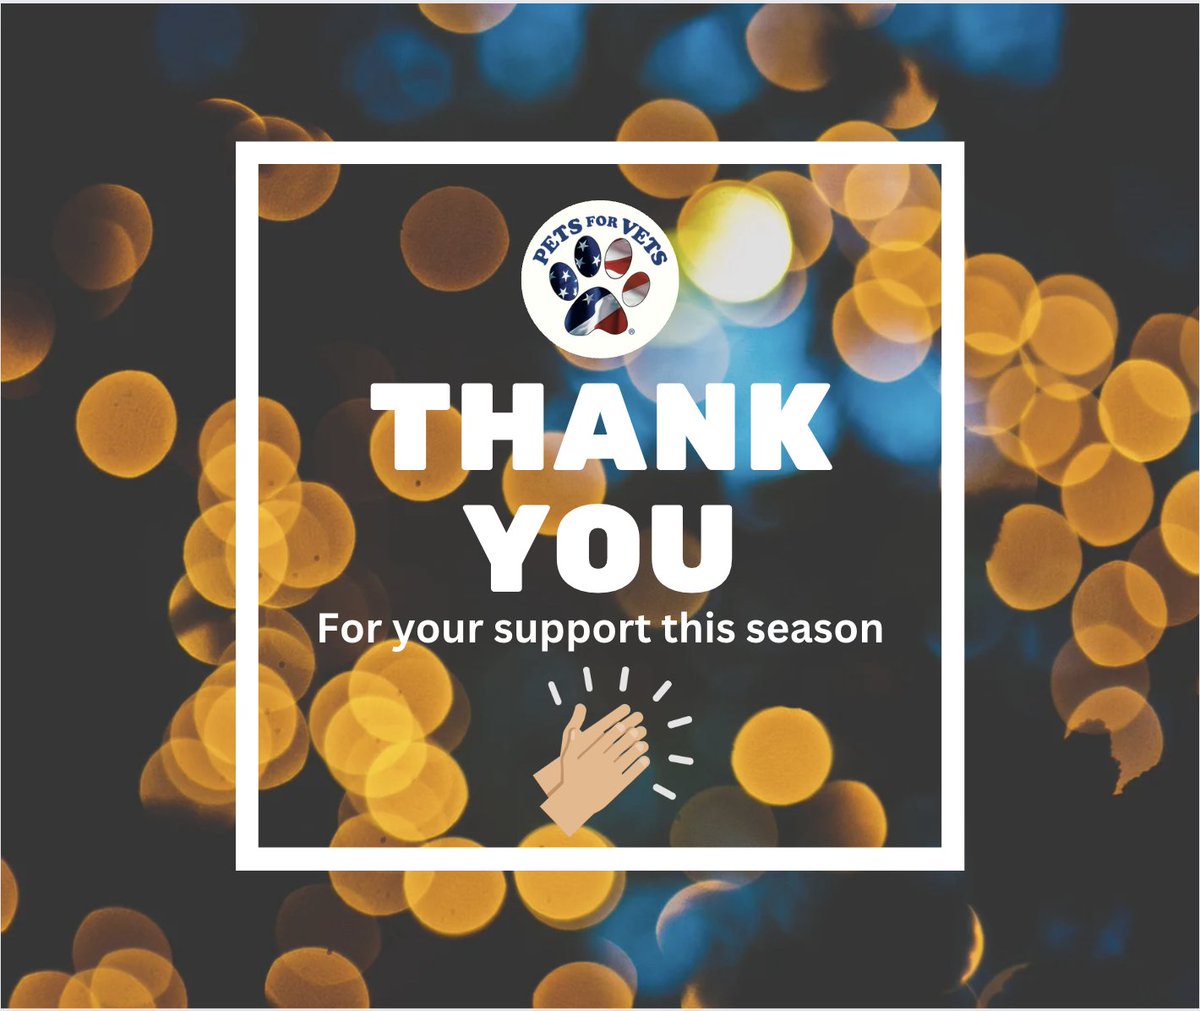 Thank you to all who supported us on Giving Tuesday! We simply cannot do what we do for Veterans and rescue animals without your support! If you would still like to give please visit petsforvets.com/donate.